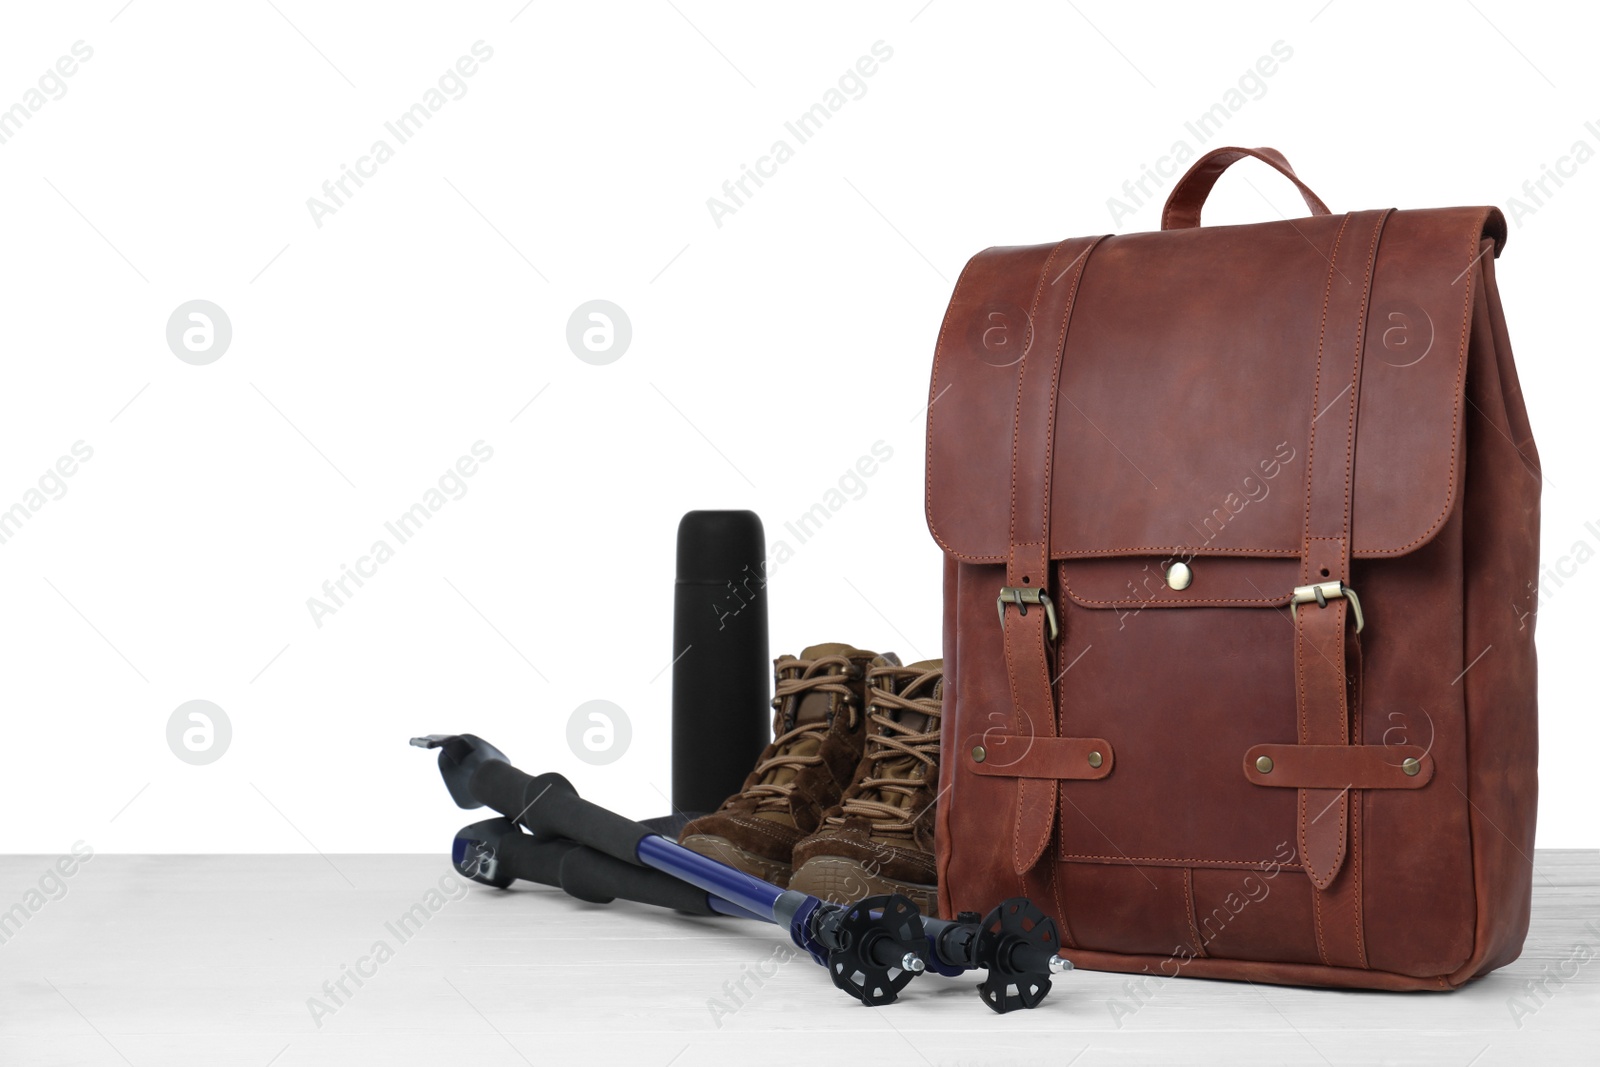 Photo of Set of camping equipment for tourist on wooden surface against white background